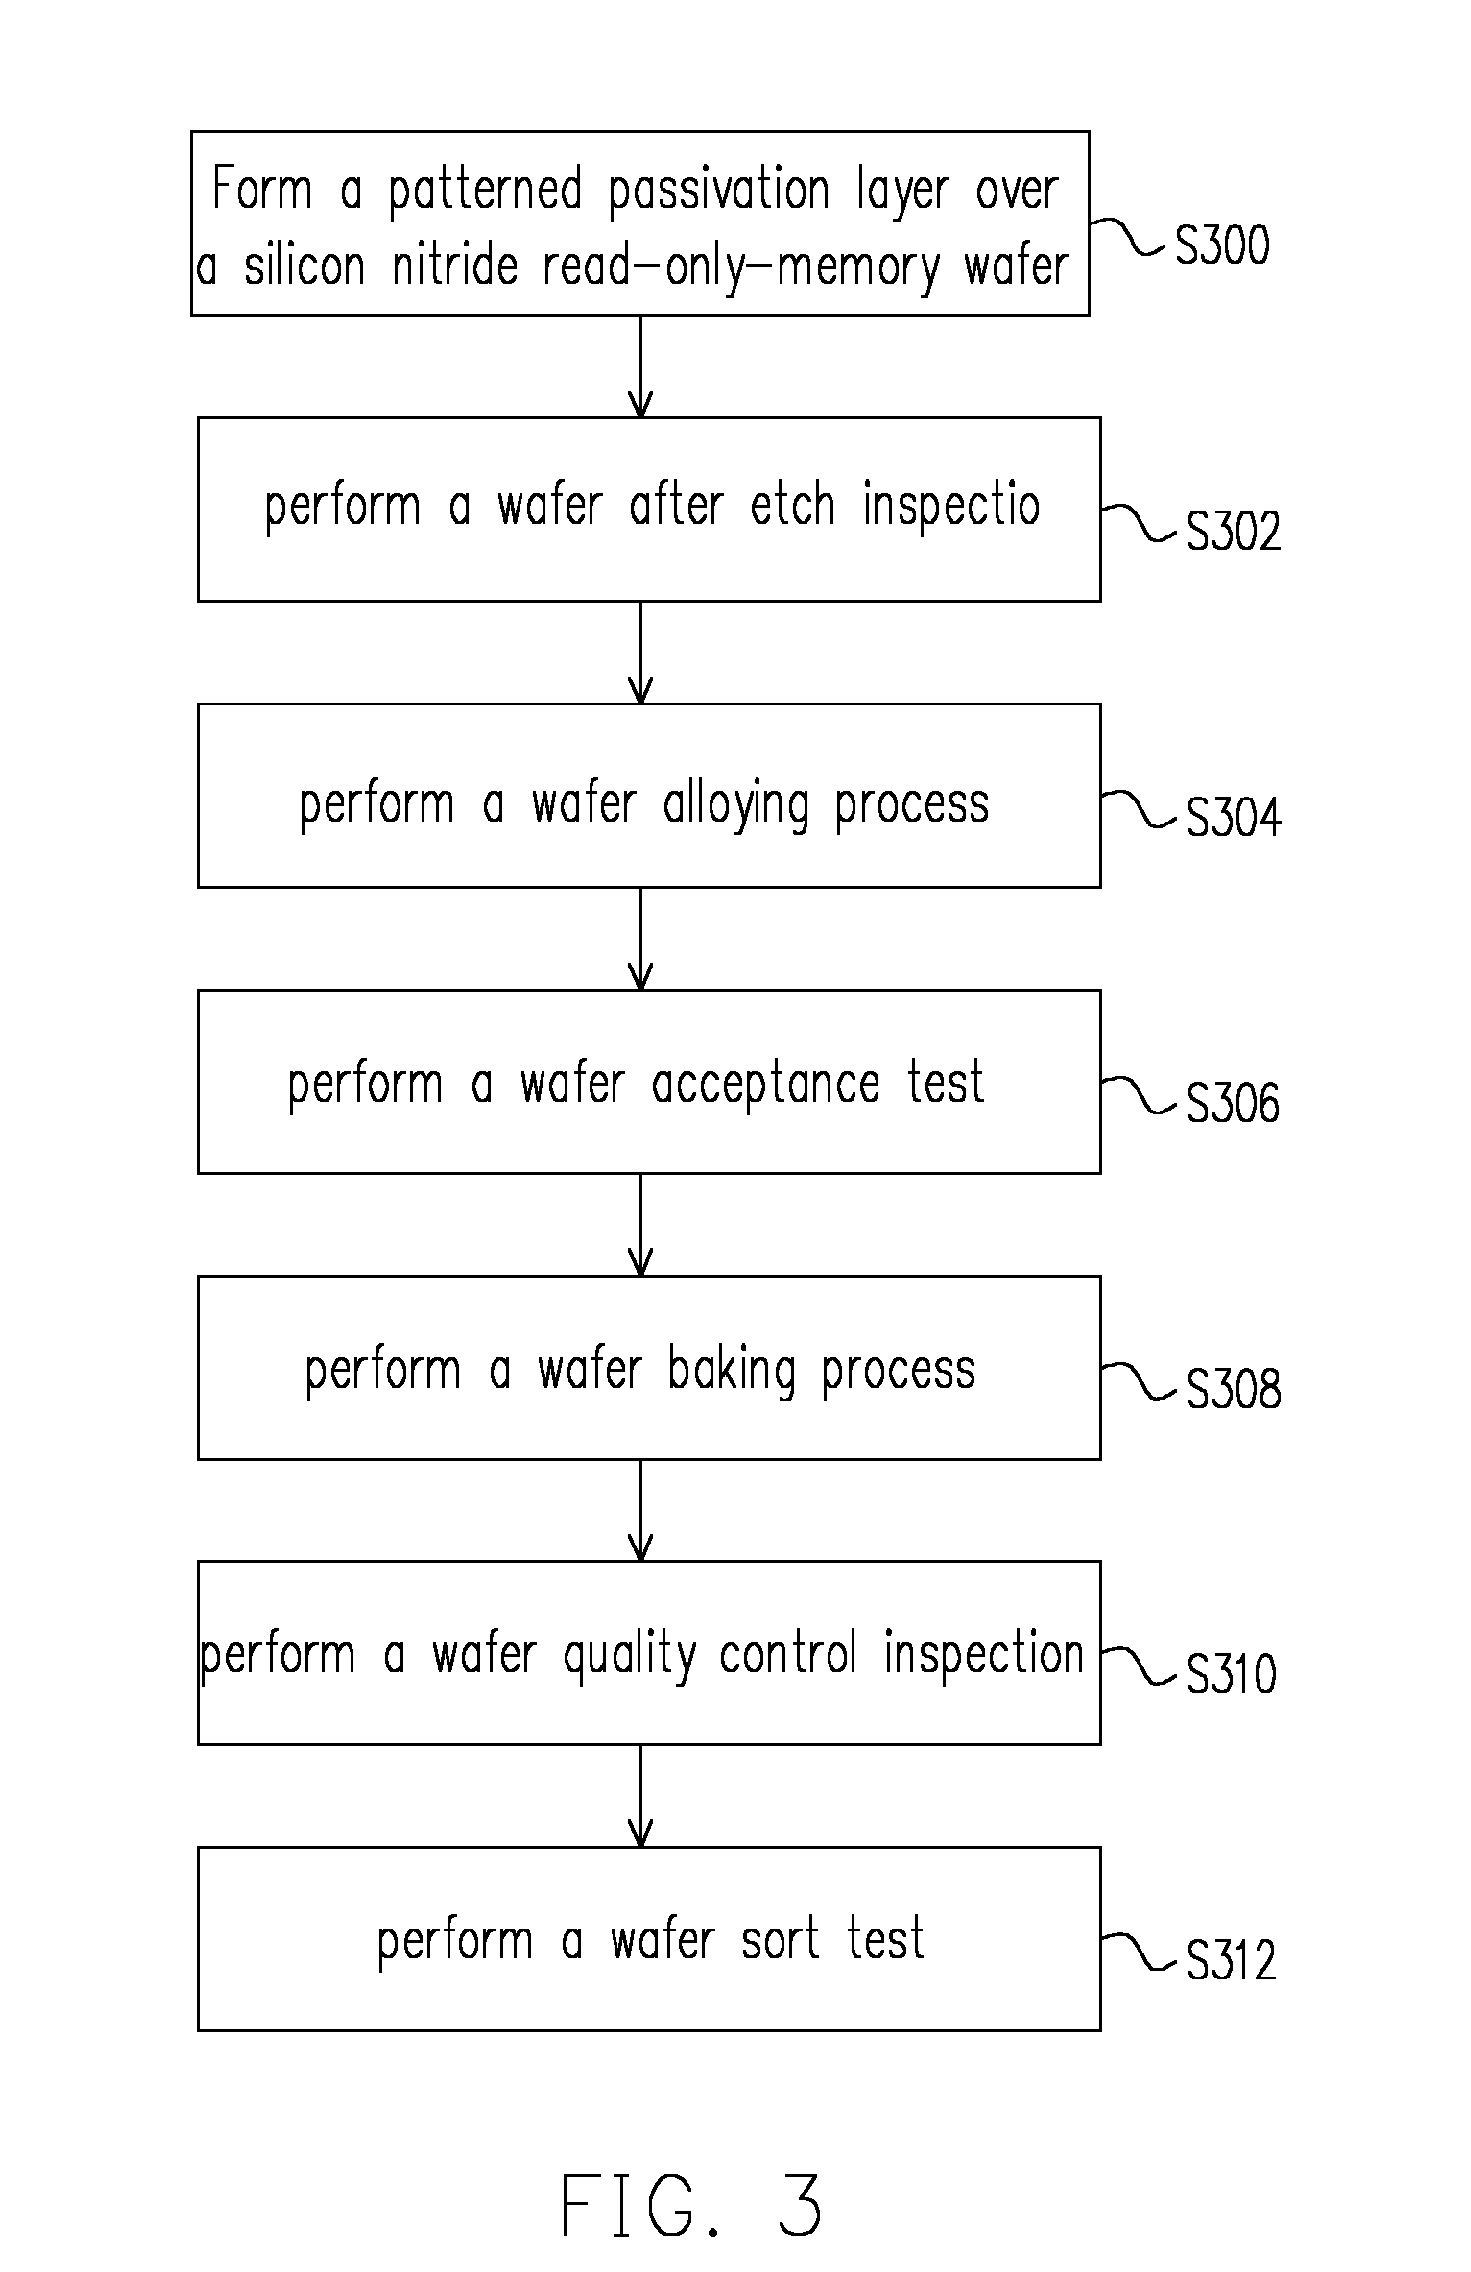 [method of increasing cell retention capacity of silicon nitride read-only-memory cell]